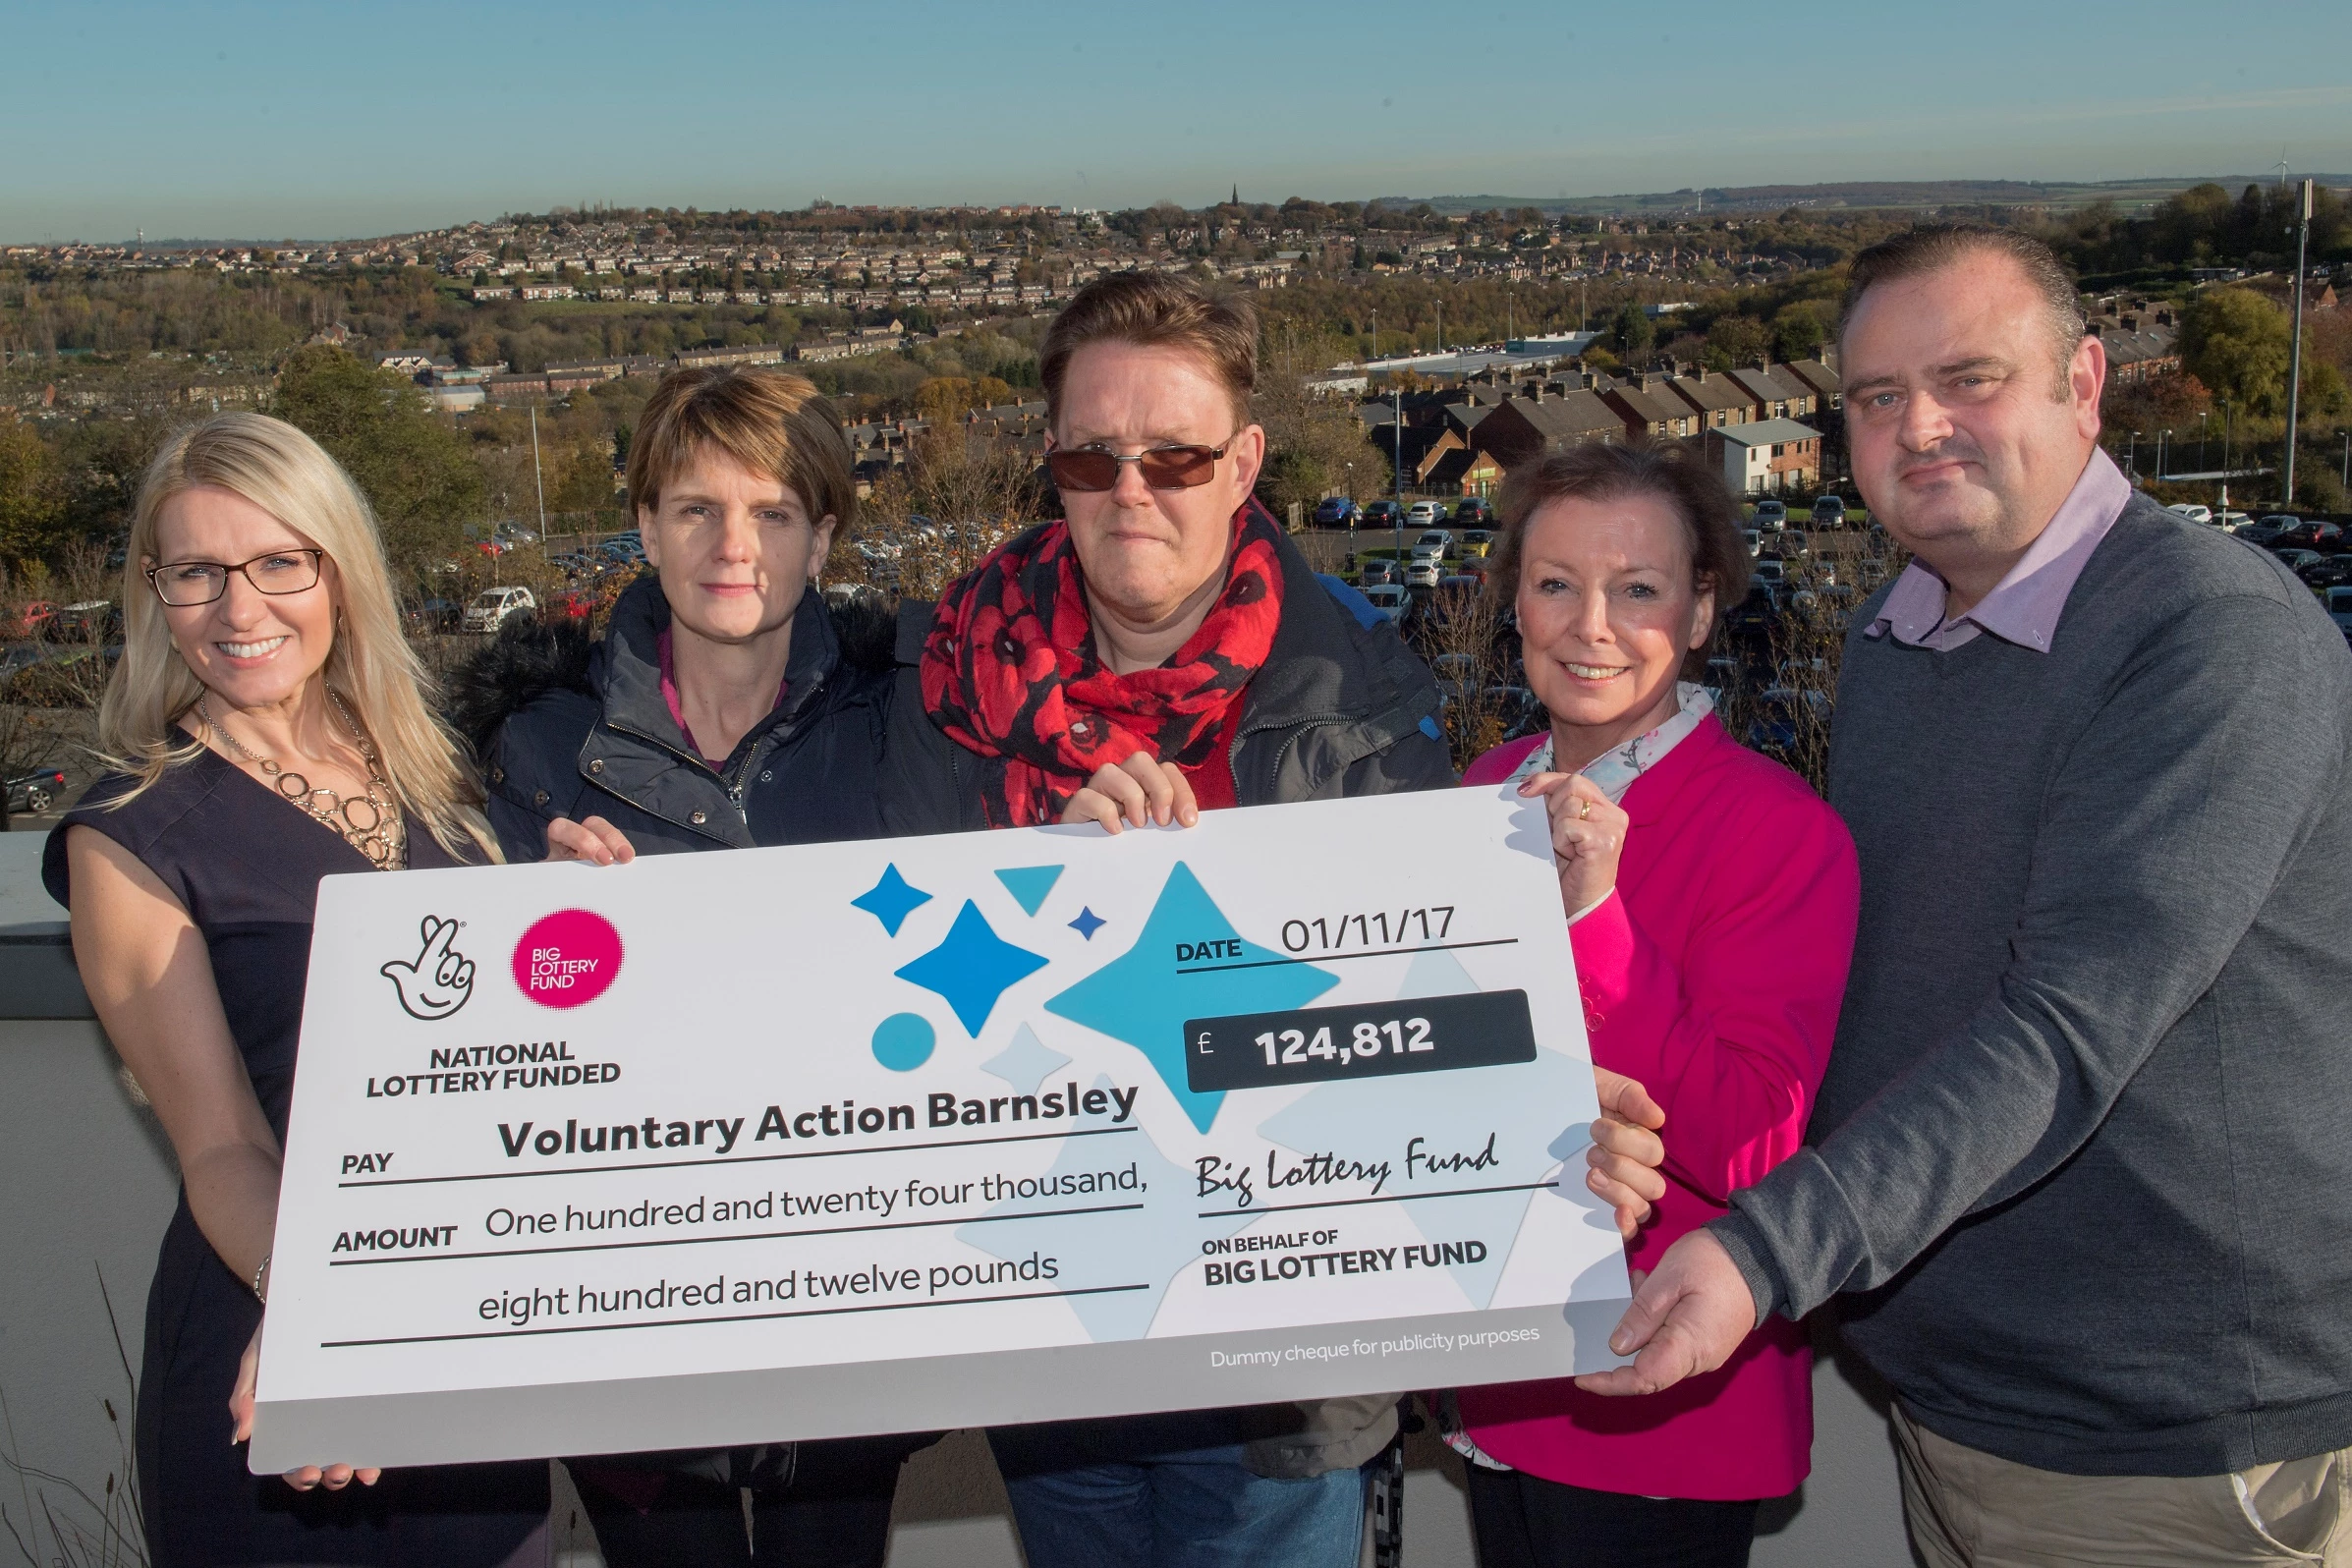 Voluntary Action Barnsley awarded almost £125,000